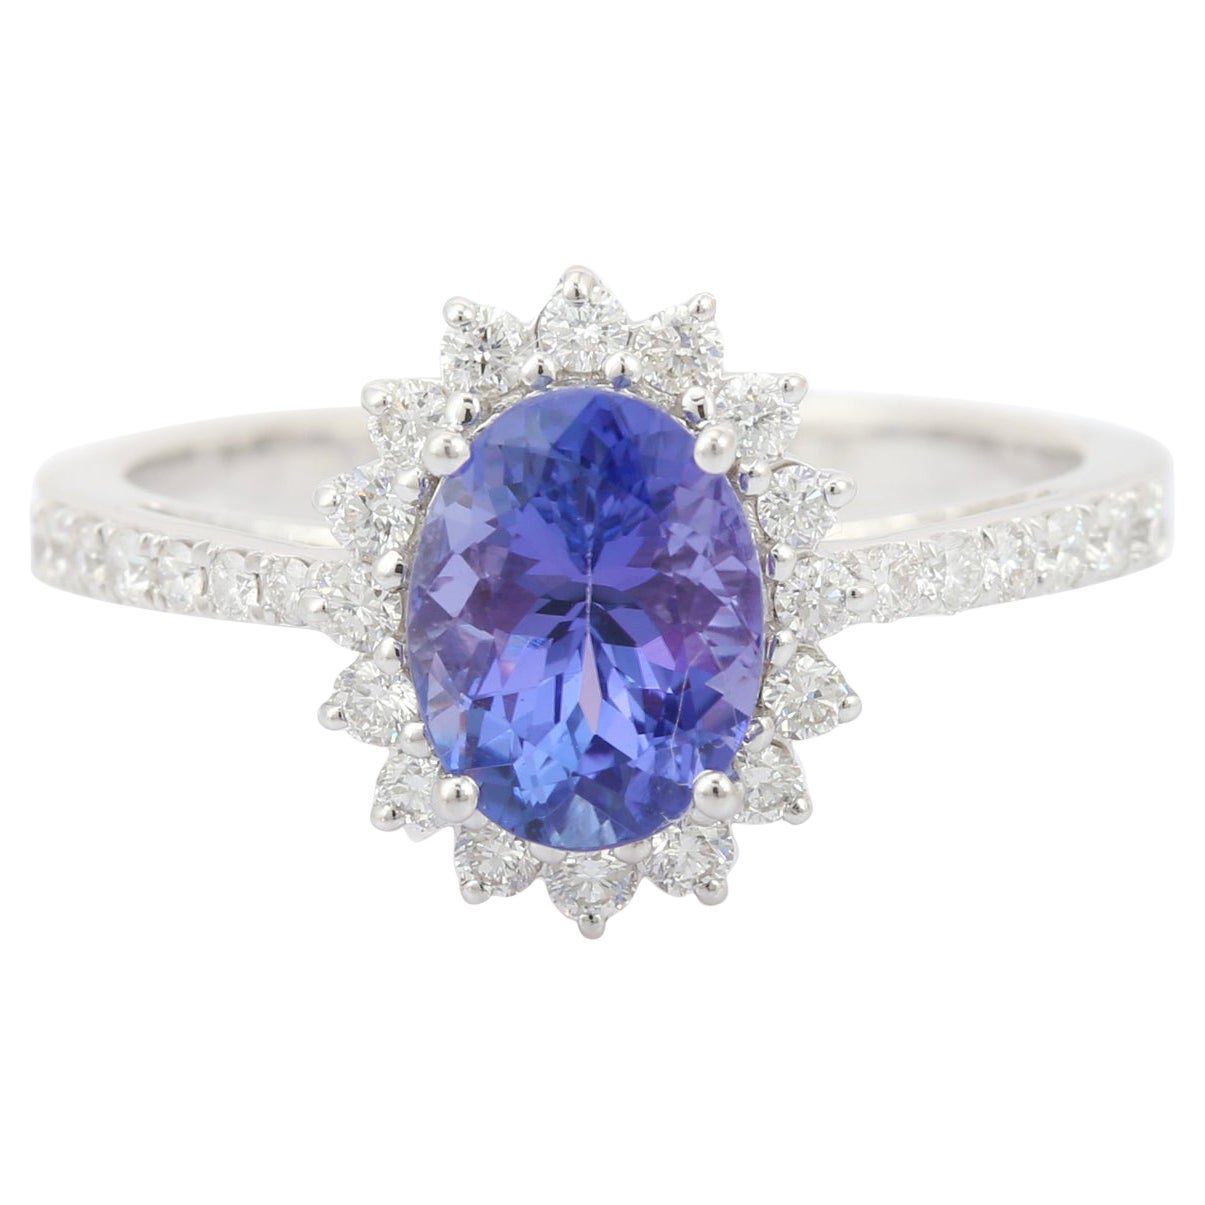 1.59 Carat Natural Tanzanite and Diamond Ring in 18k Solid White Gold